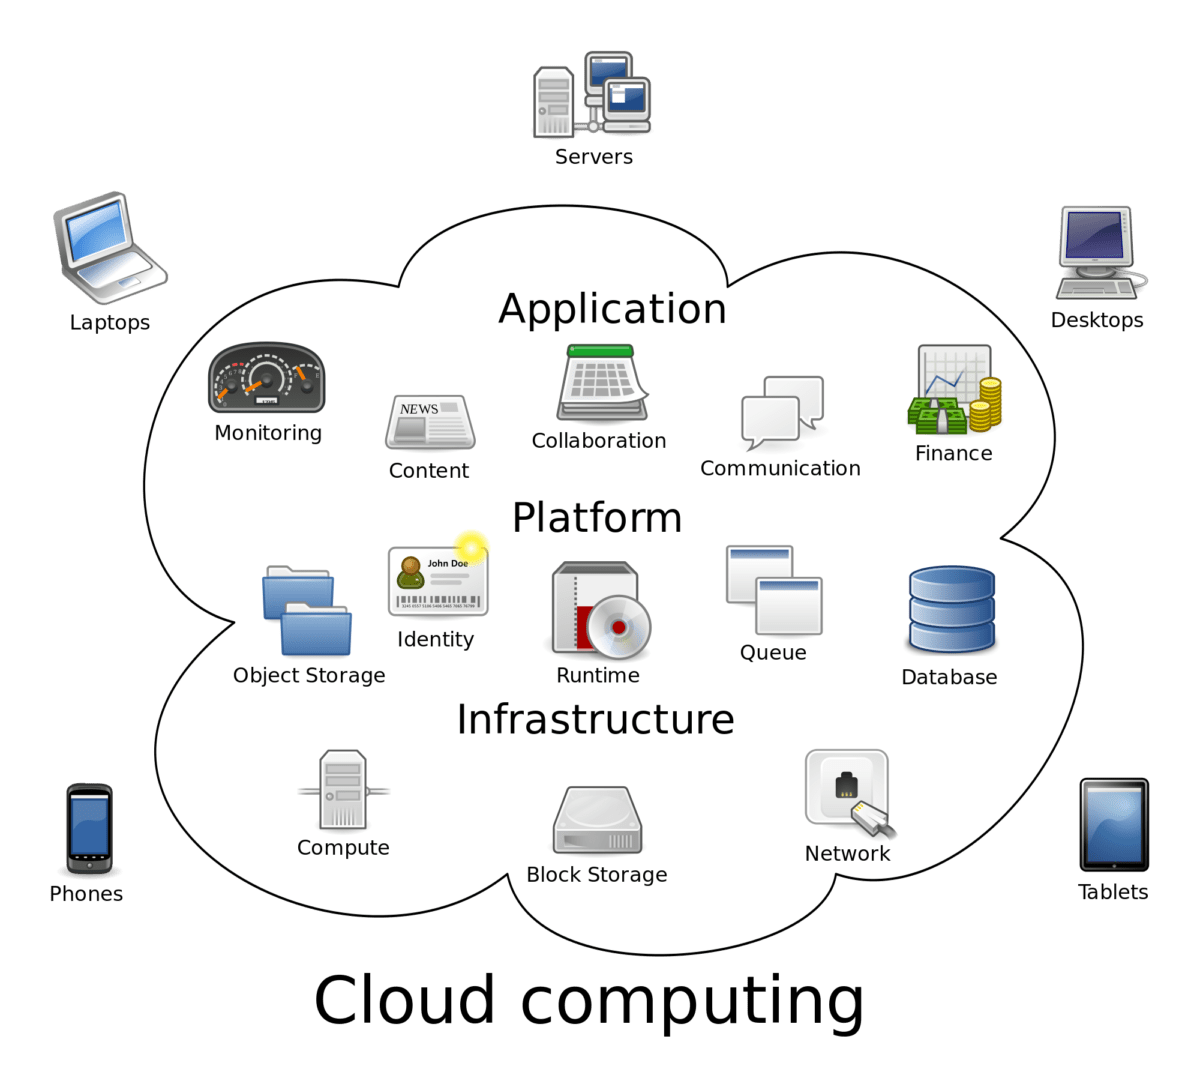 Free cloud computing tools help to surprisingly boost your business